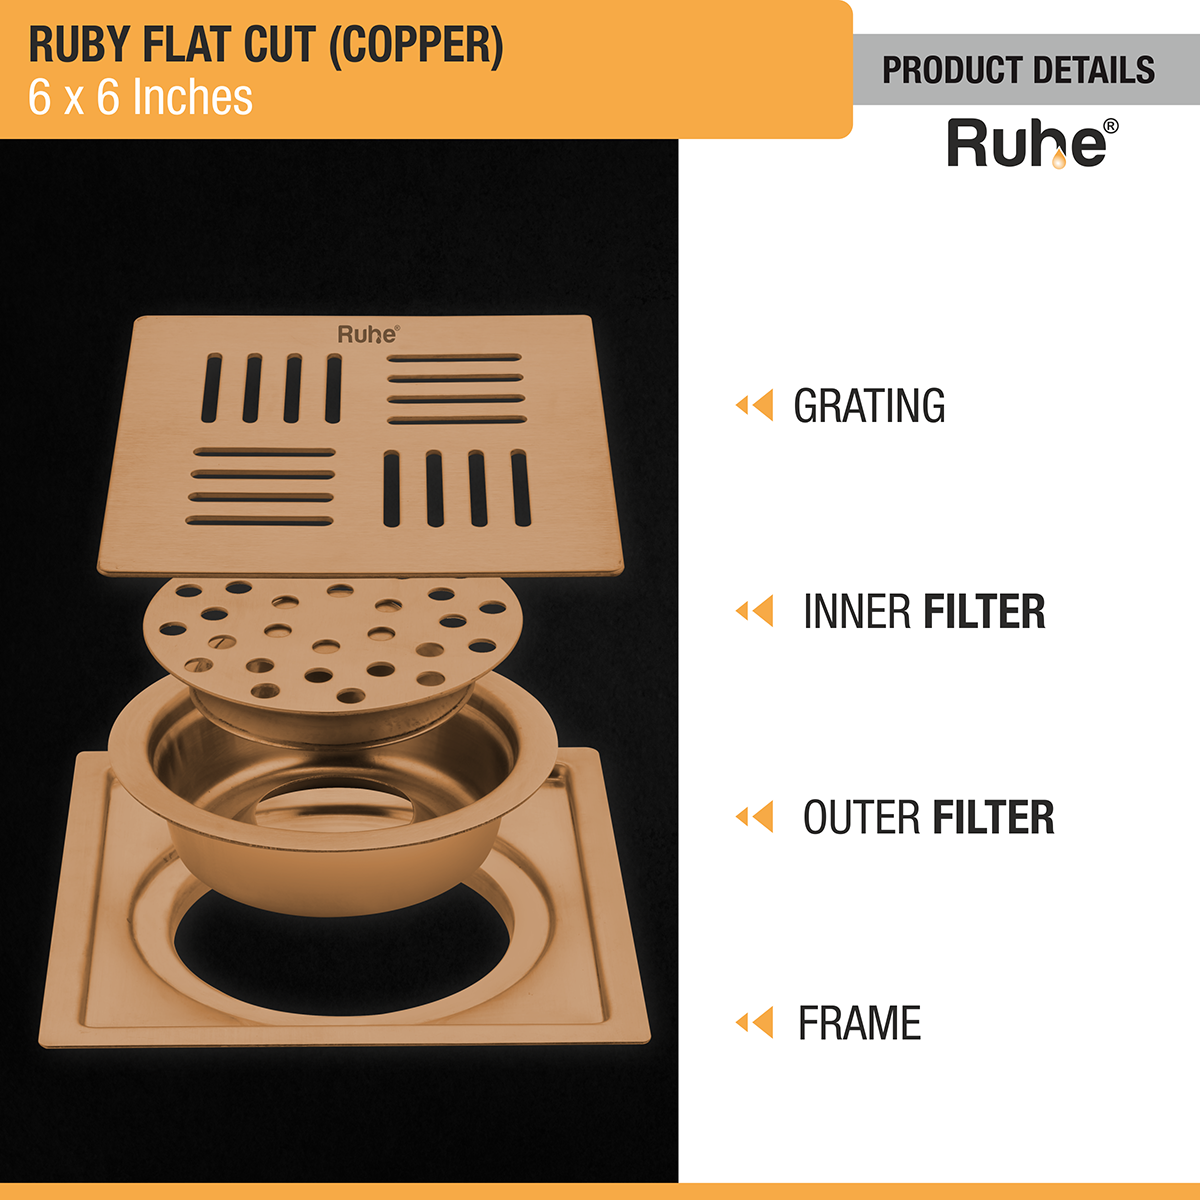 Ruby Square Flat Cut Floor Drain in Antique Copper PVD Coating (6 x 6 Inches product details